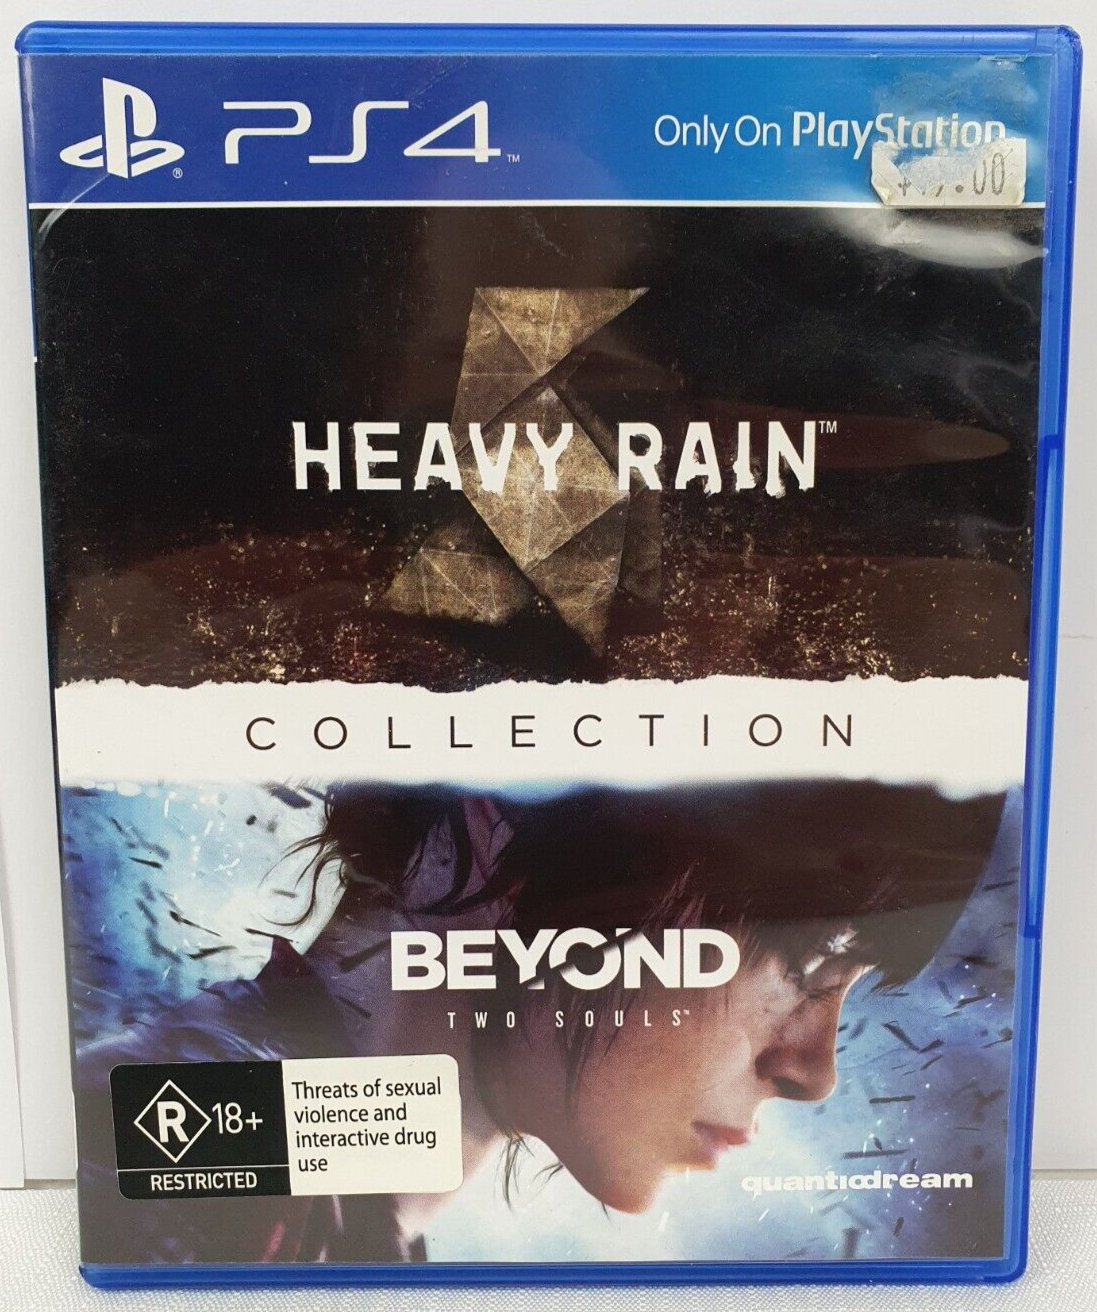 Game | Sony Playstation PS4 | The Heavy Rain Collection